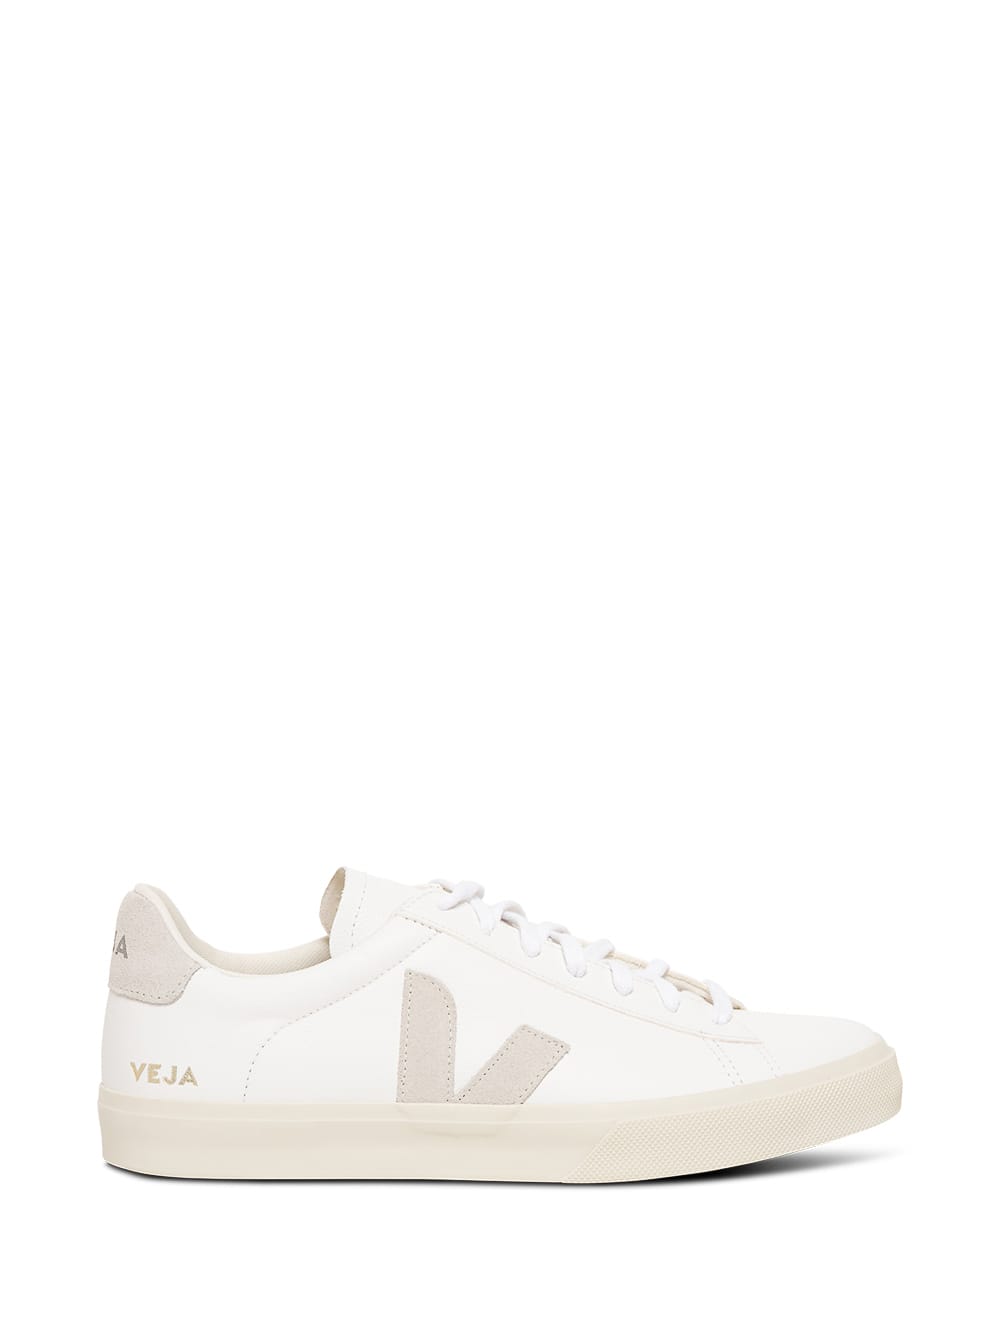 Veja White And Beige Vegan Leather Sneakers